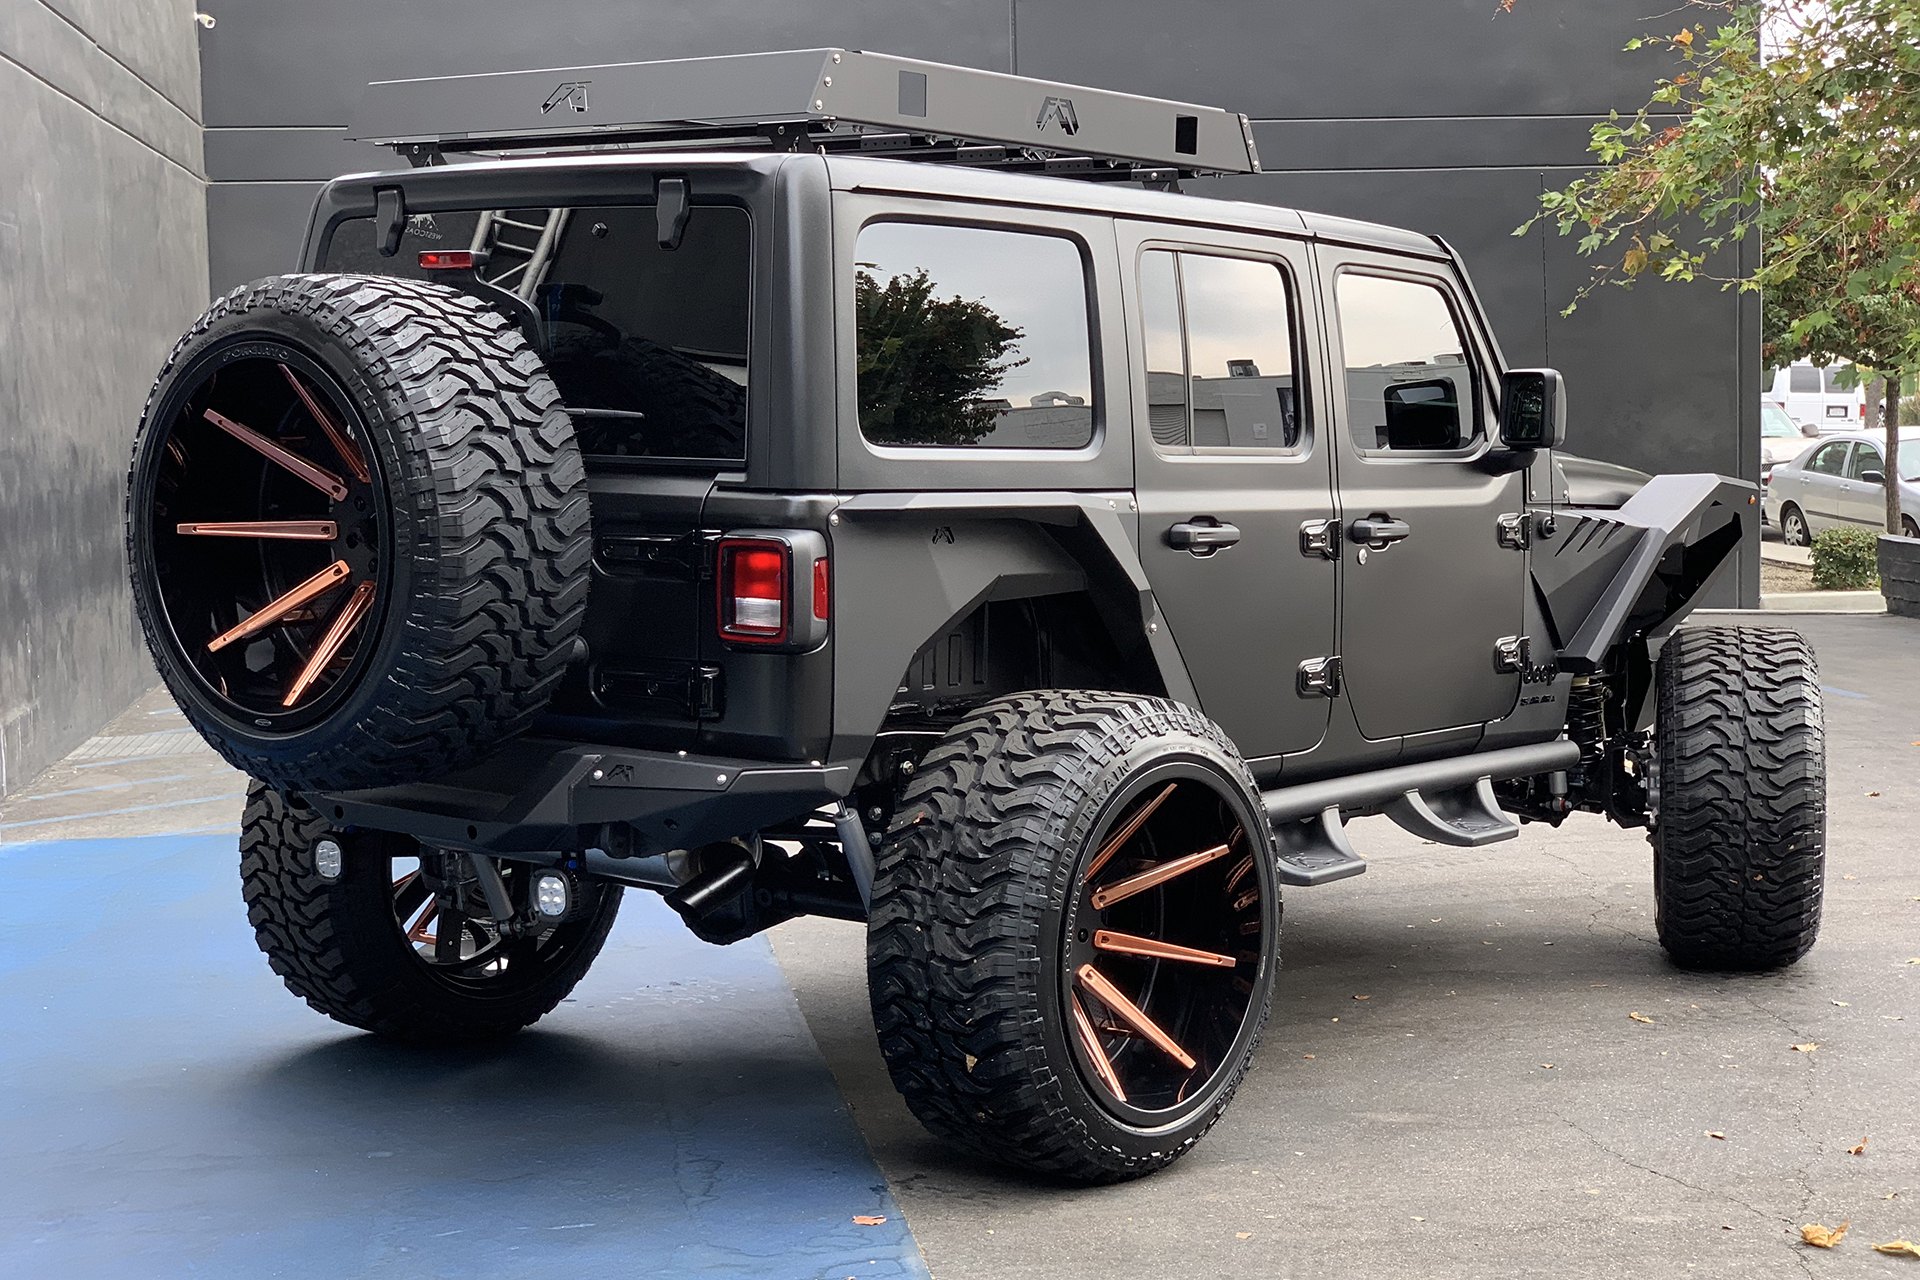 Fab Fours Rear Bumper on Black Lifted Jeep Wrangler - Photo by Forgiato